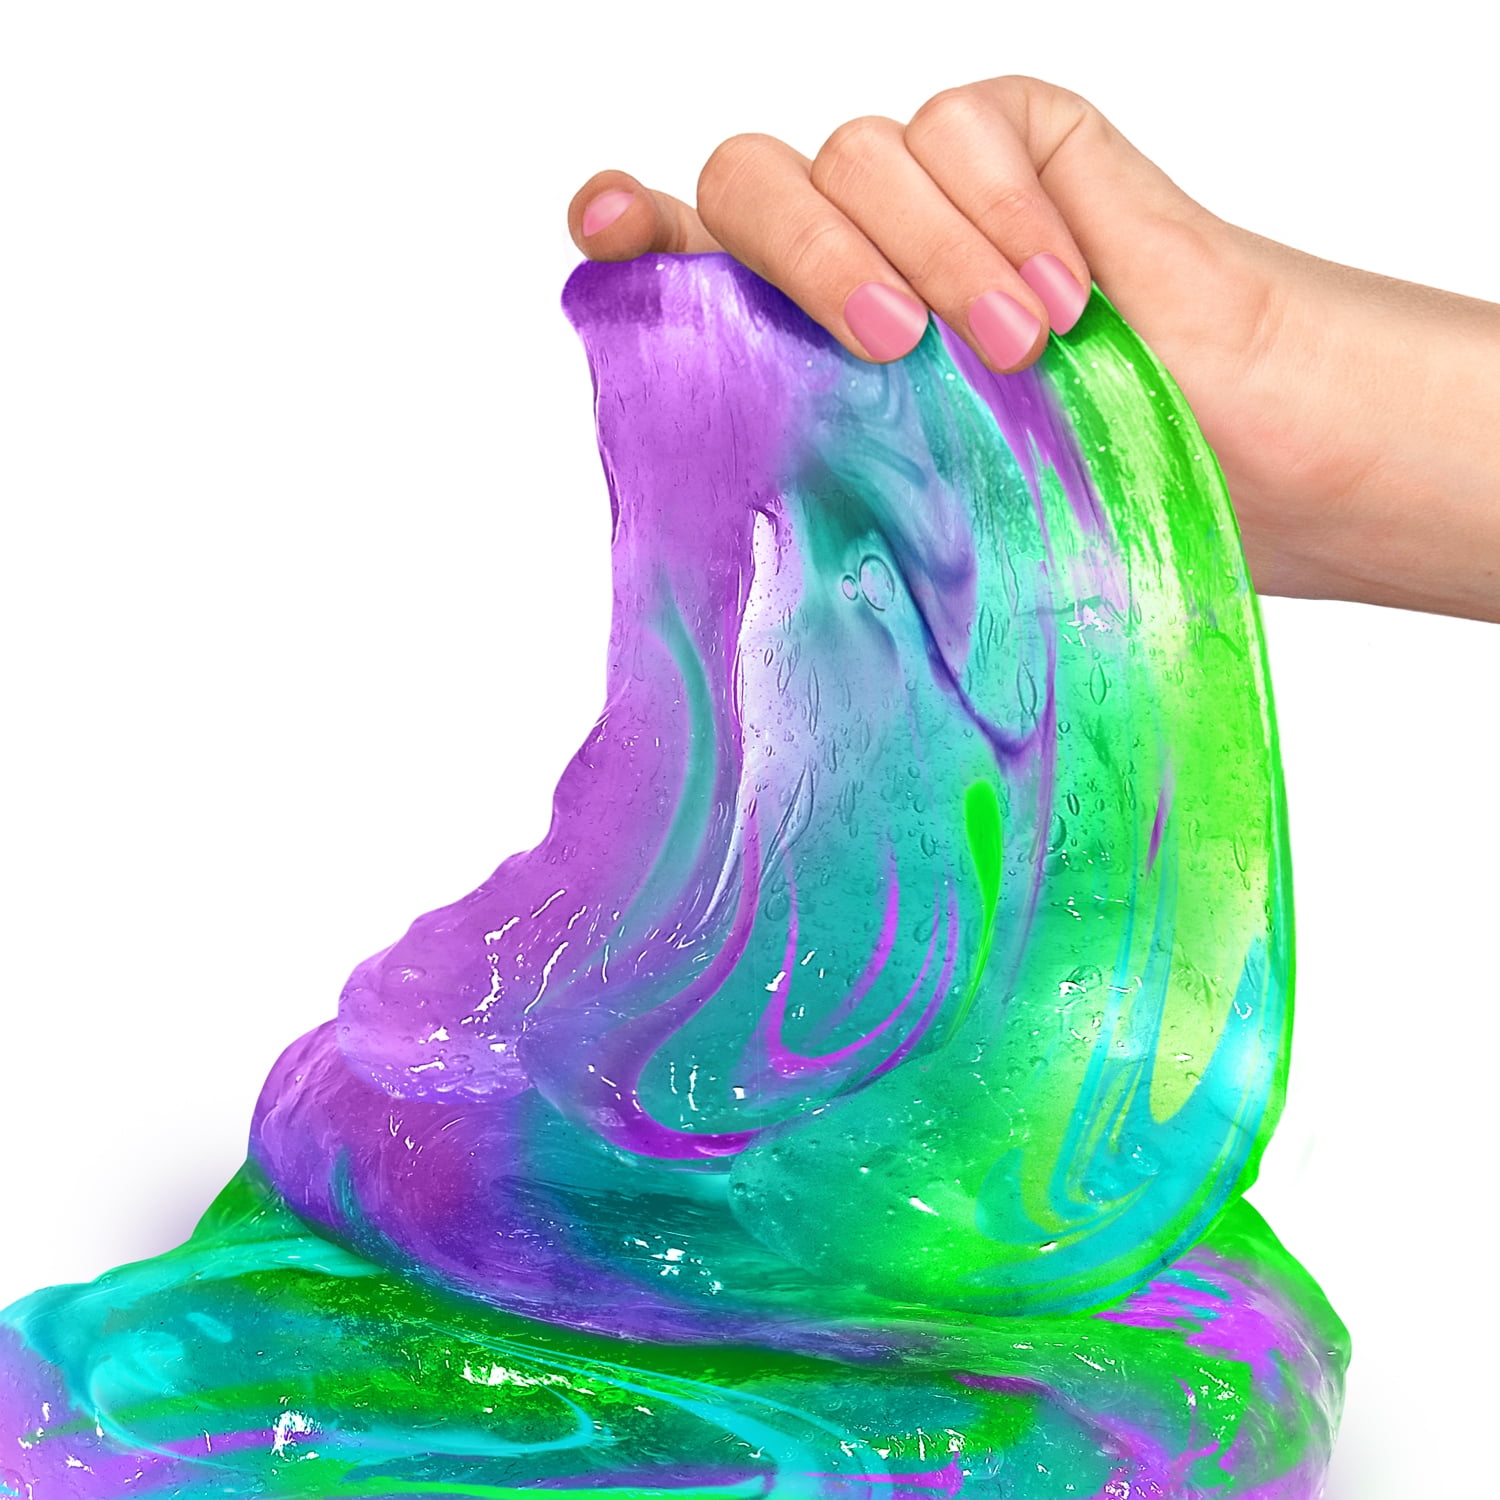 Review and Giveaway: So Slime Tie-Dye Slime Machine - Counting To Ten